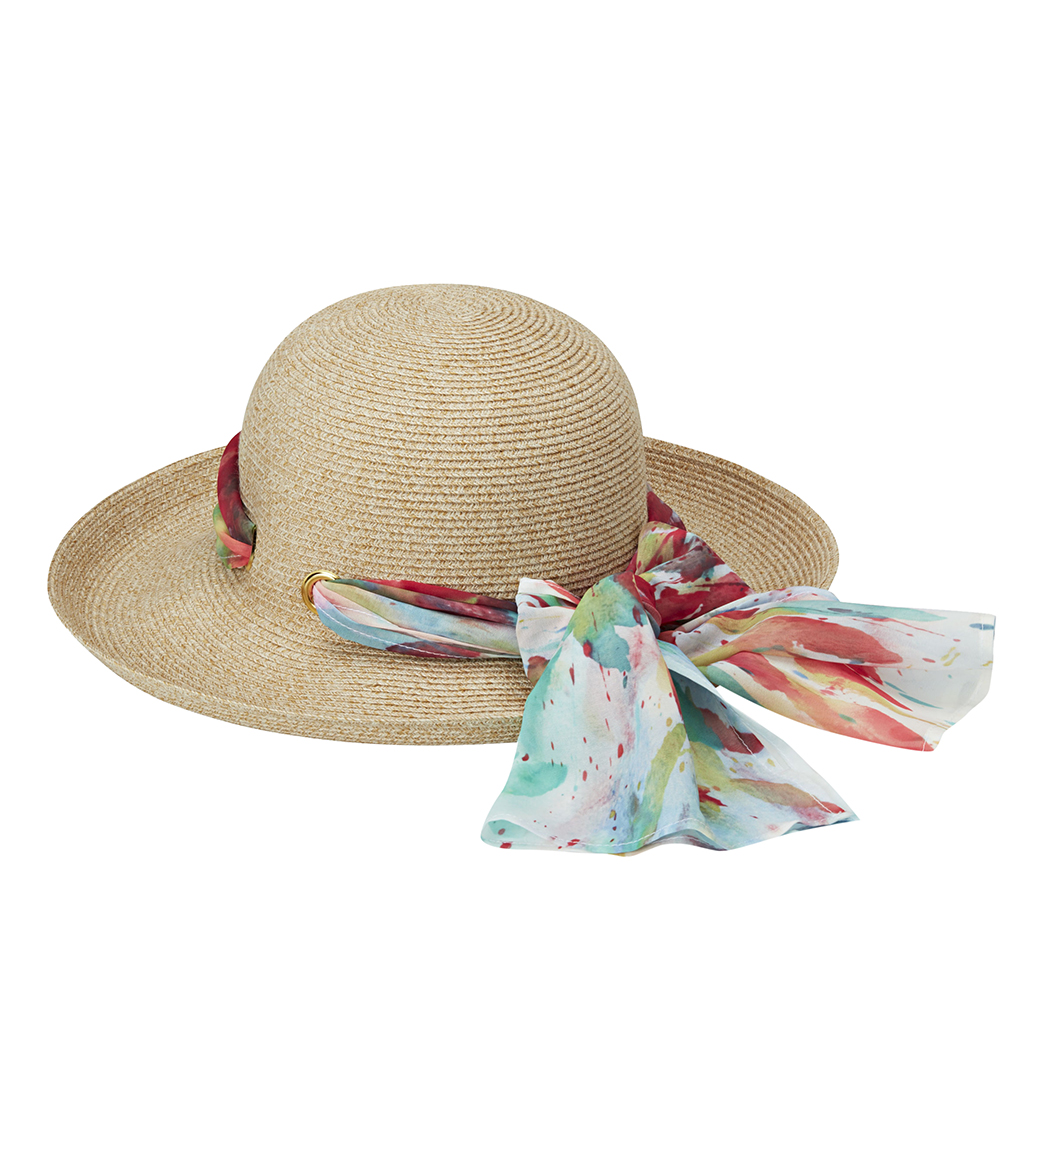 Wallaroo Women's Lady Jane Straw Hat With Ribbon - Natural One Size Polyester - Swimoutlet.com